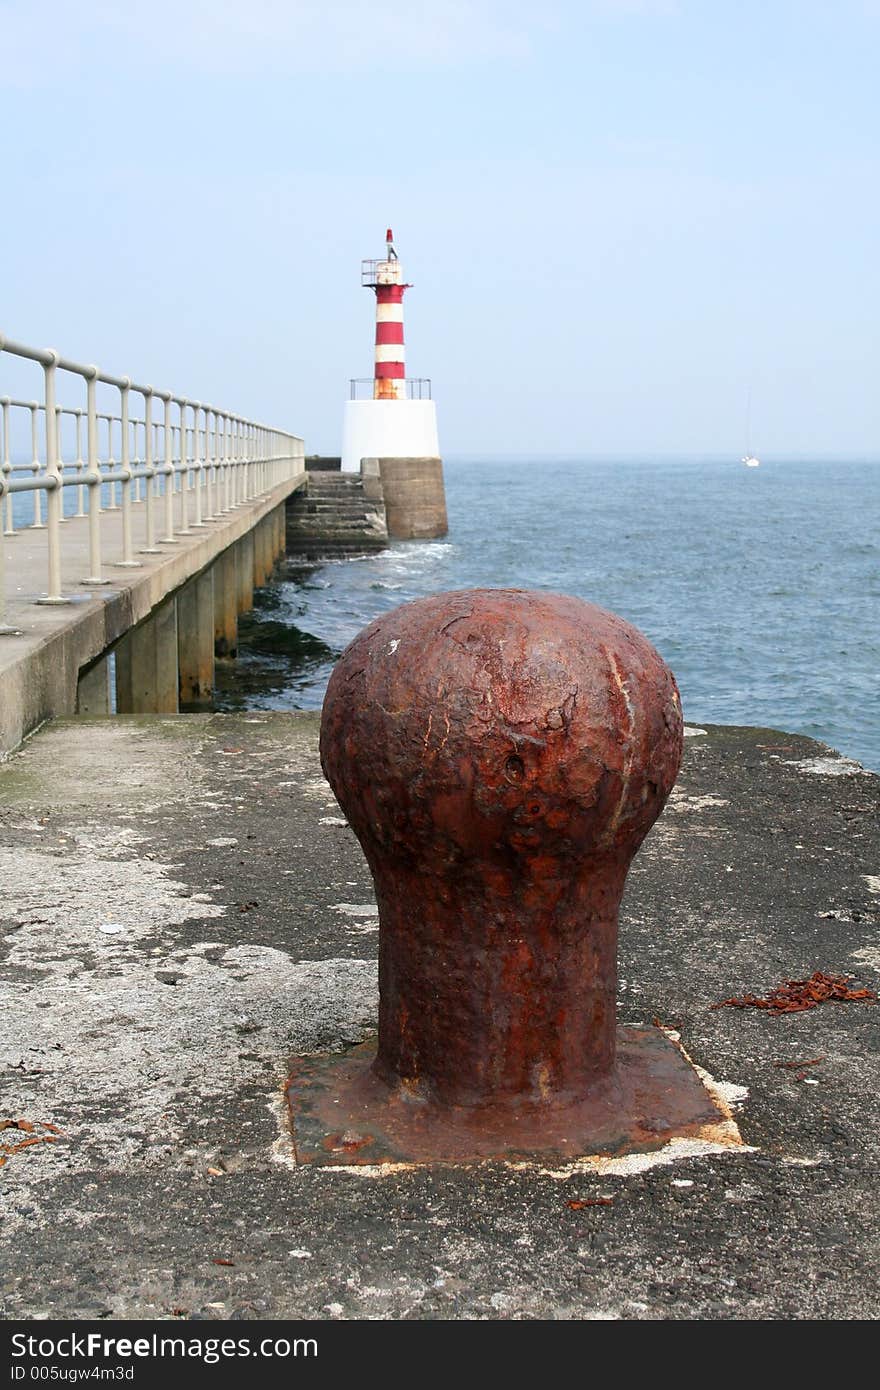 Ships and boats navigate their way inland by the red and white beacon and then can moor by tying their lines against these large bollards. Ships and boats navigate their way inland by the red and white beacon and then can moor by tying their lines against these large bollards